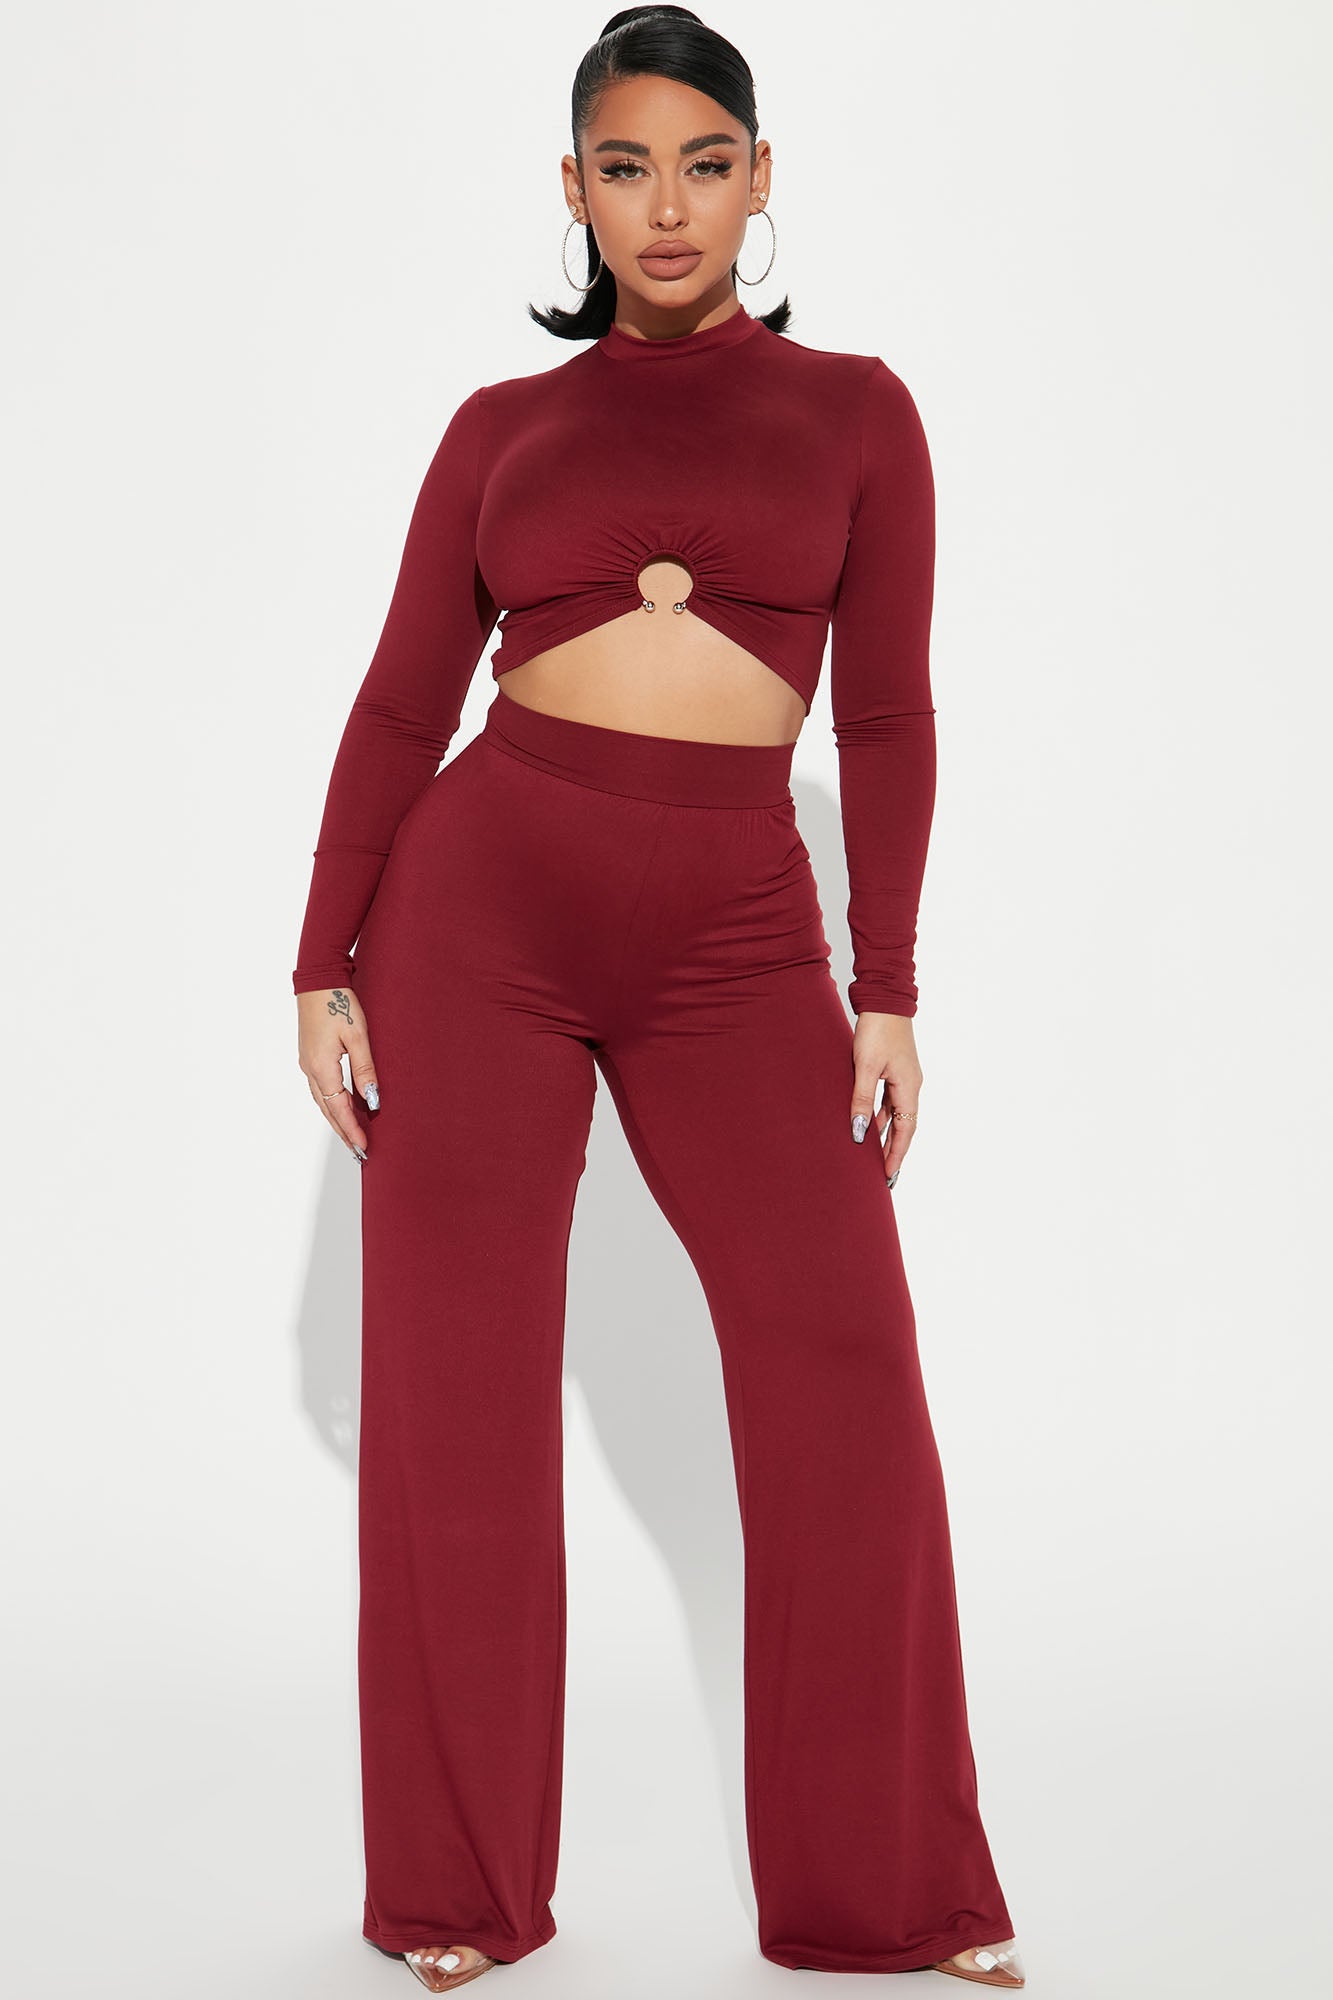 In Your Dreams Pant Set - Burgundy